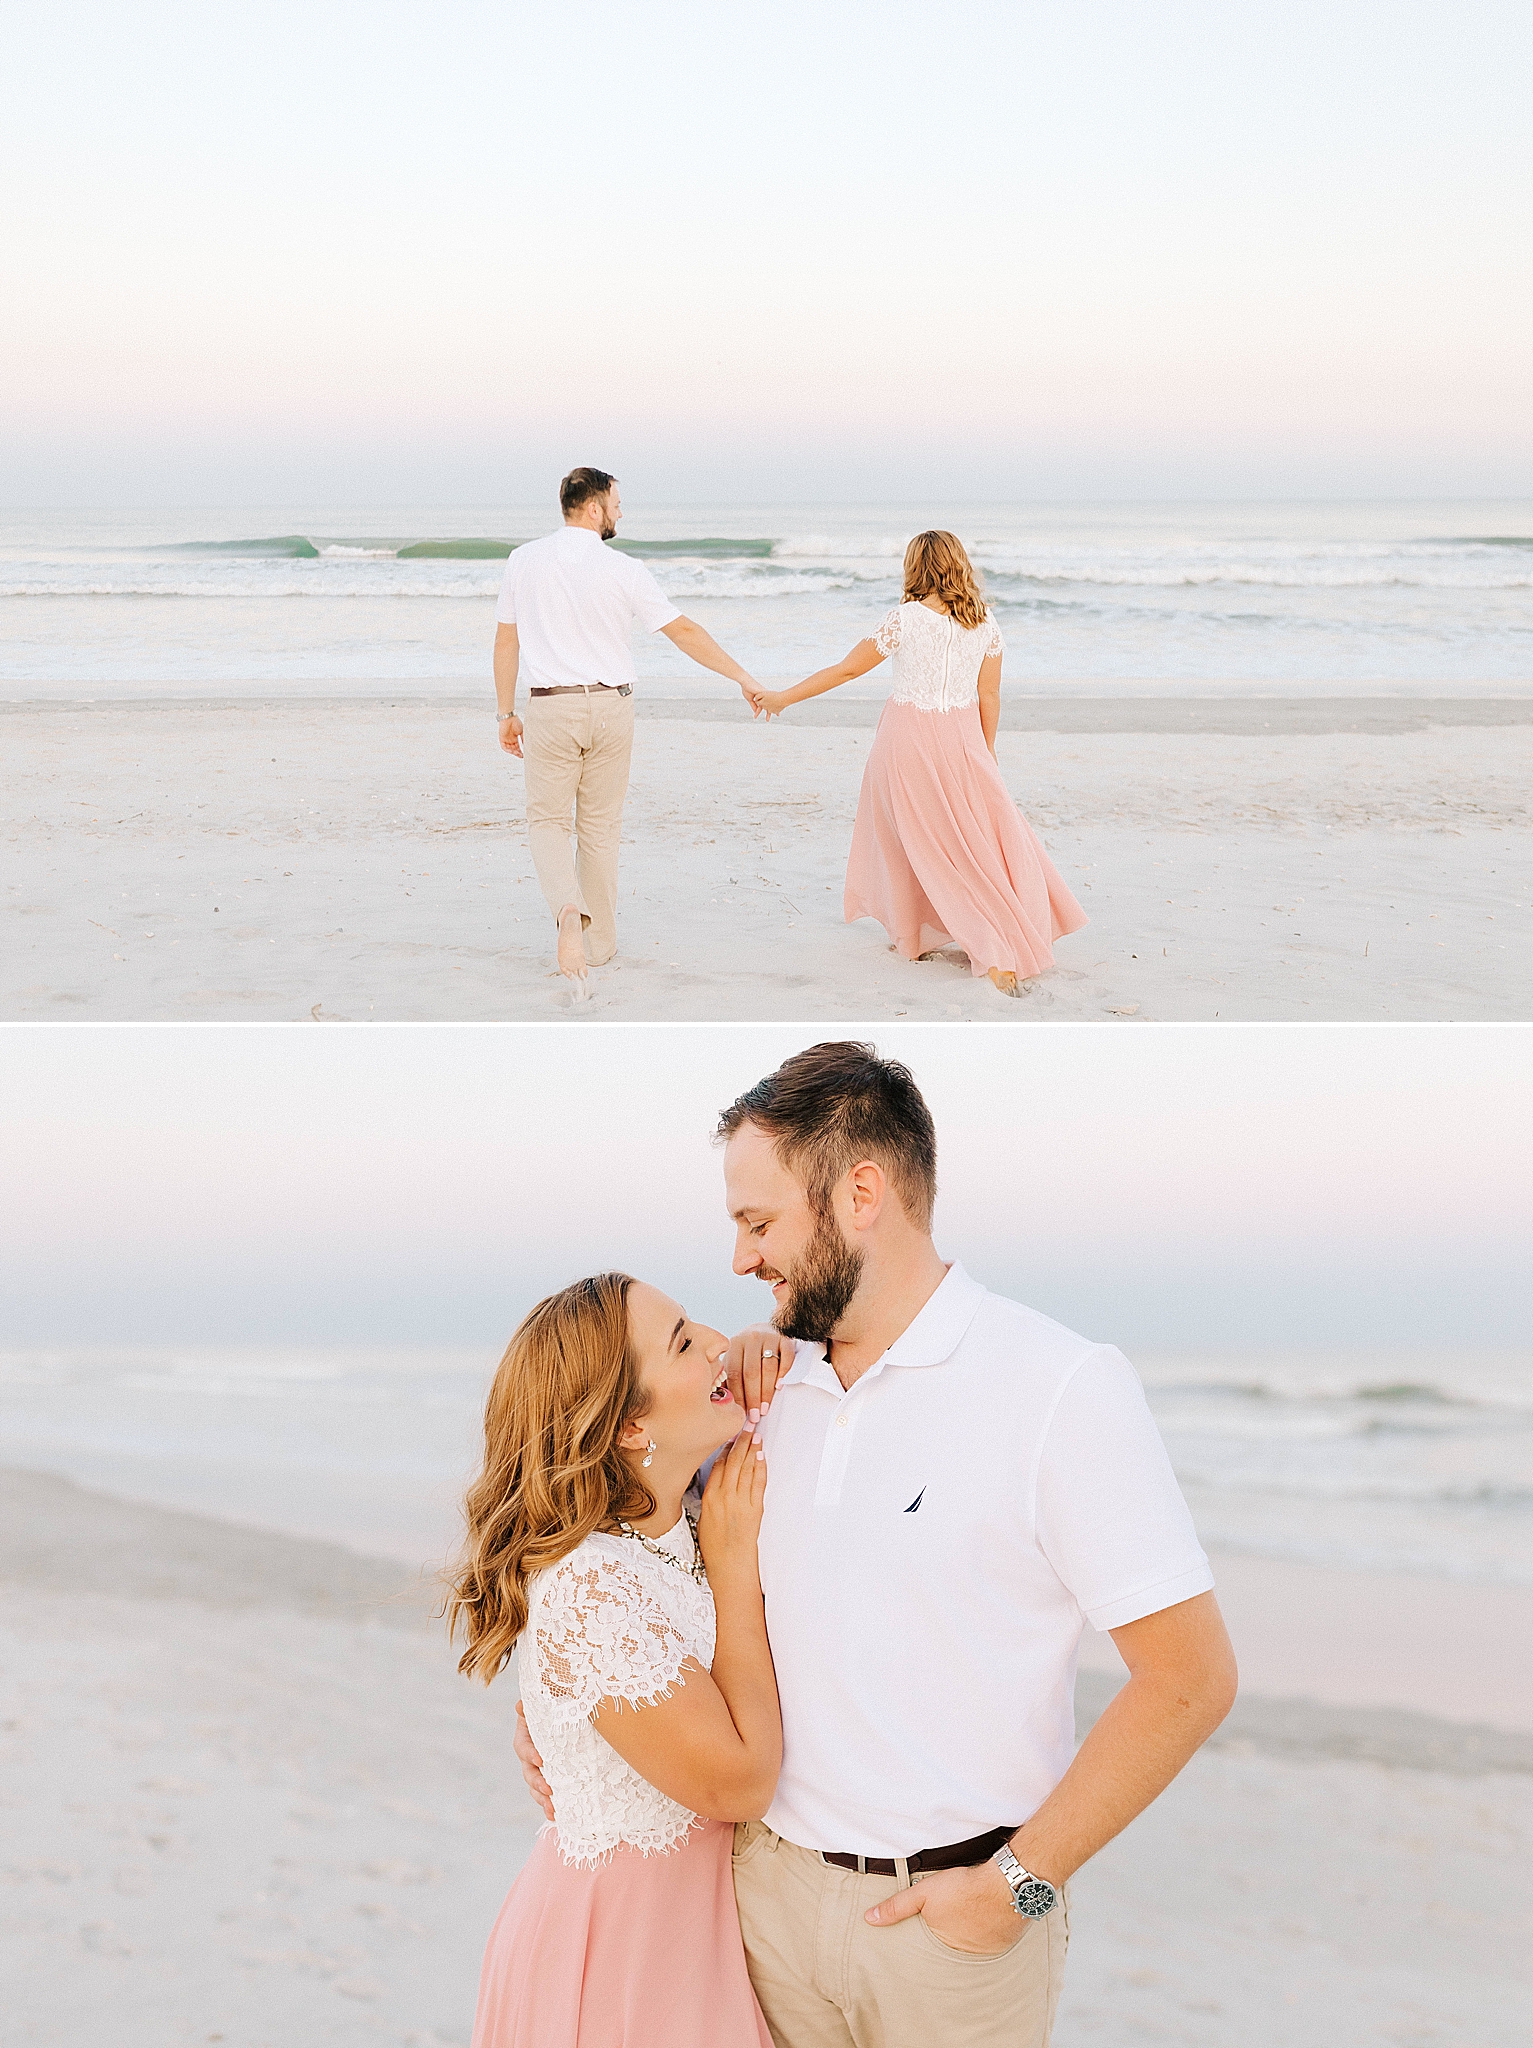 Wilmington engagement session on Wrightsville Beach in the spring